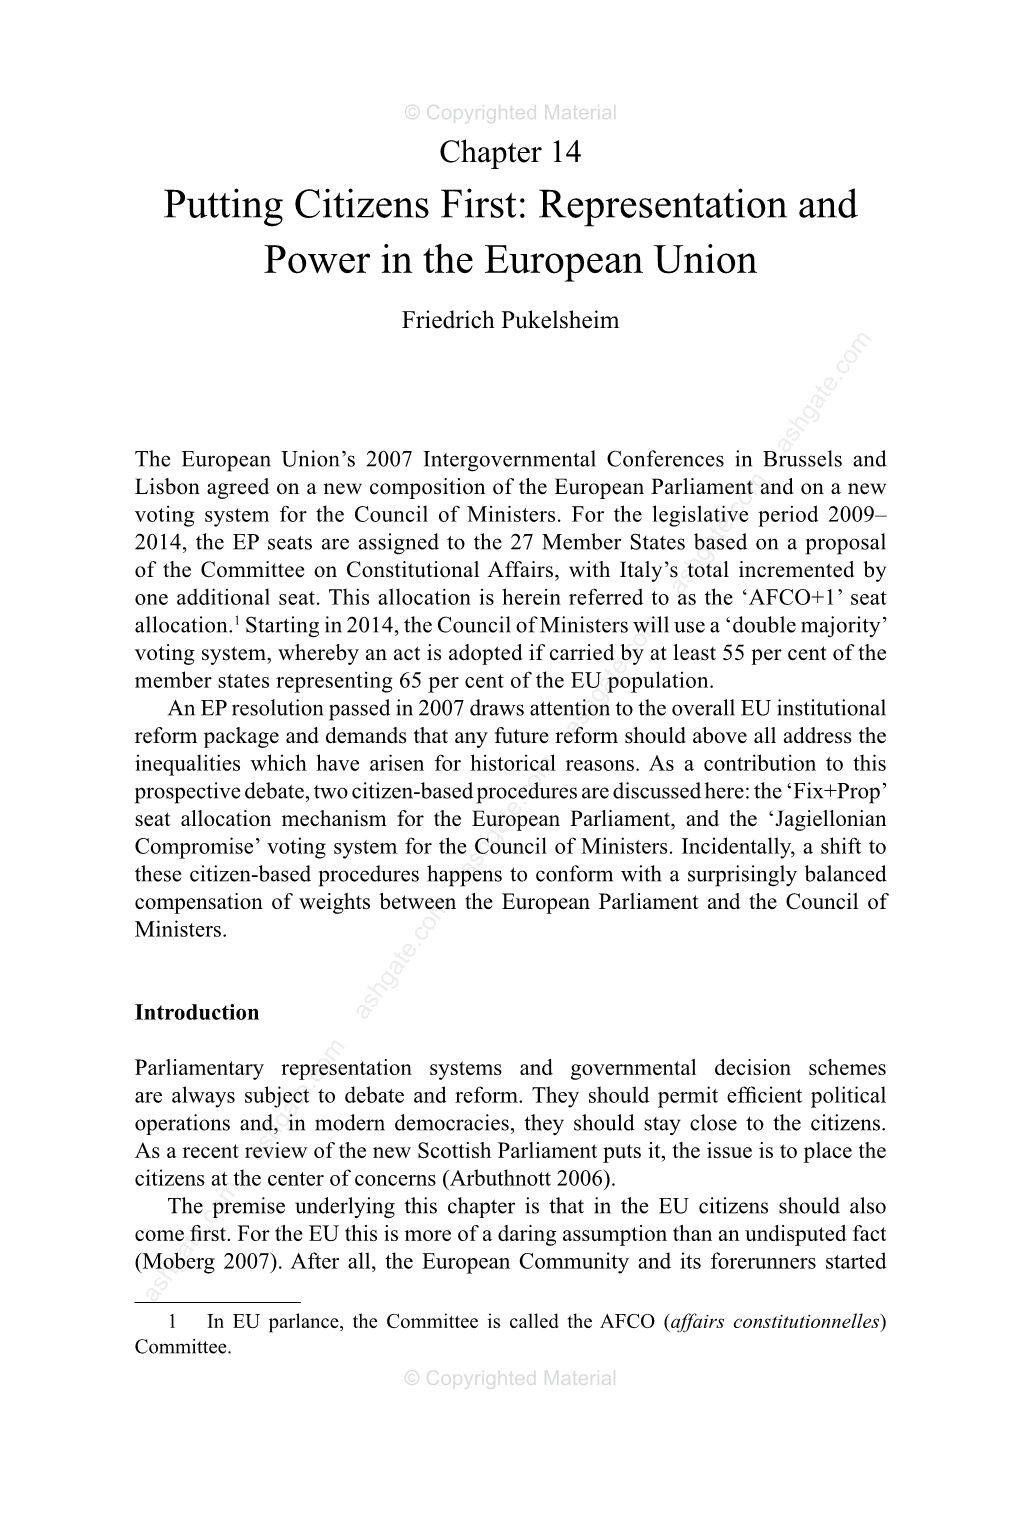 Putting Citizens First: Representation and Power in the European Union